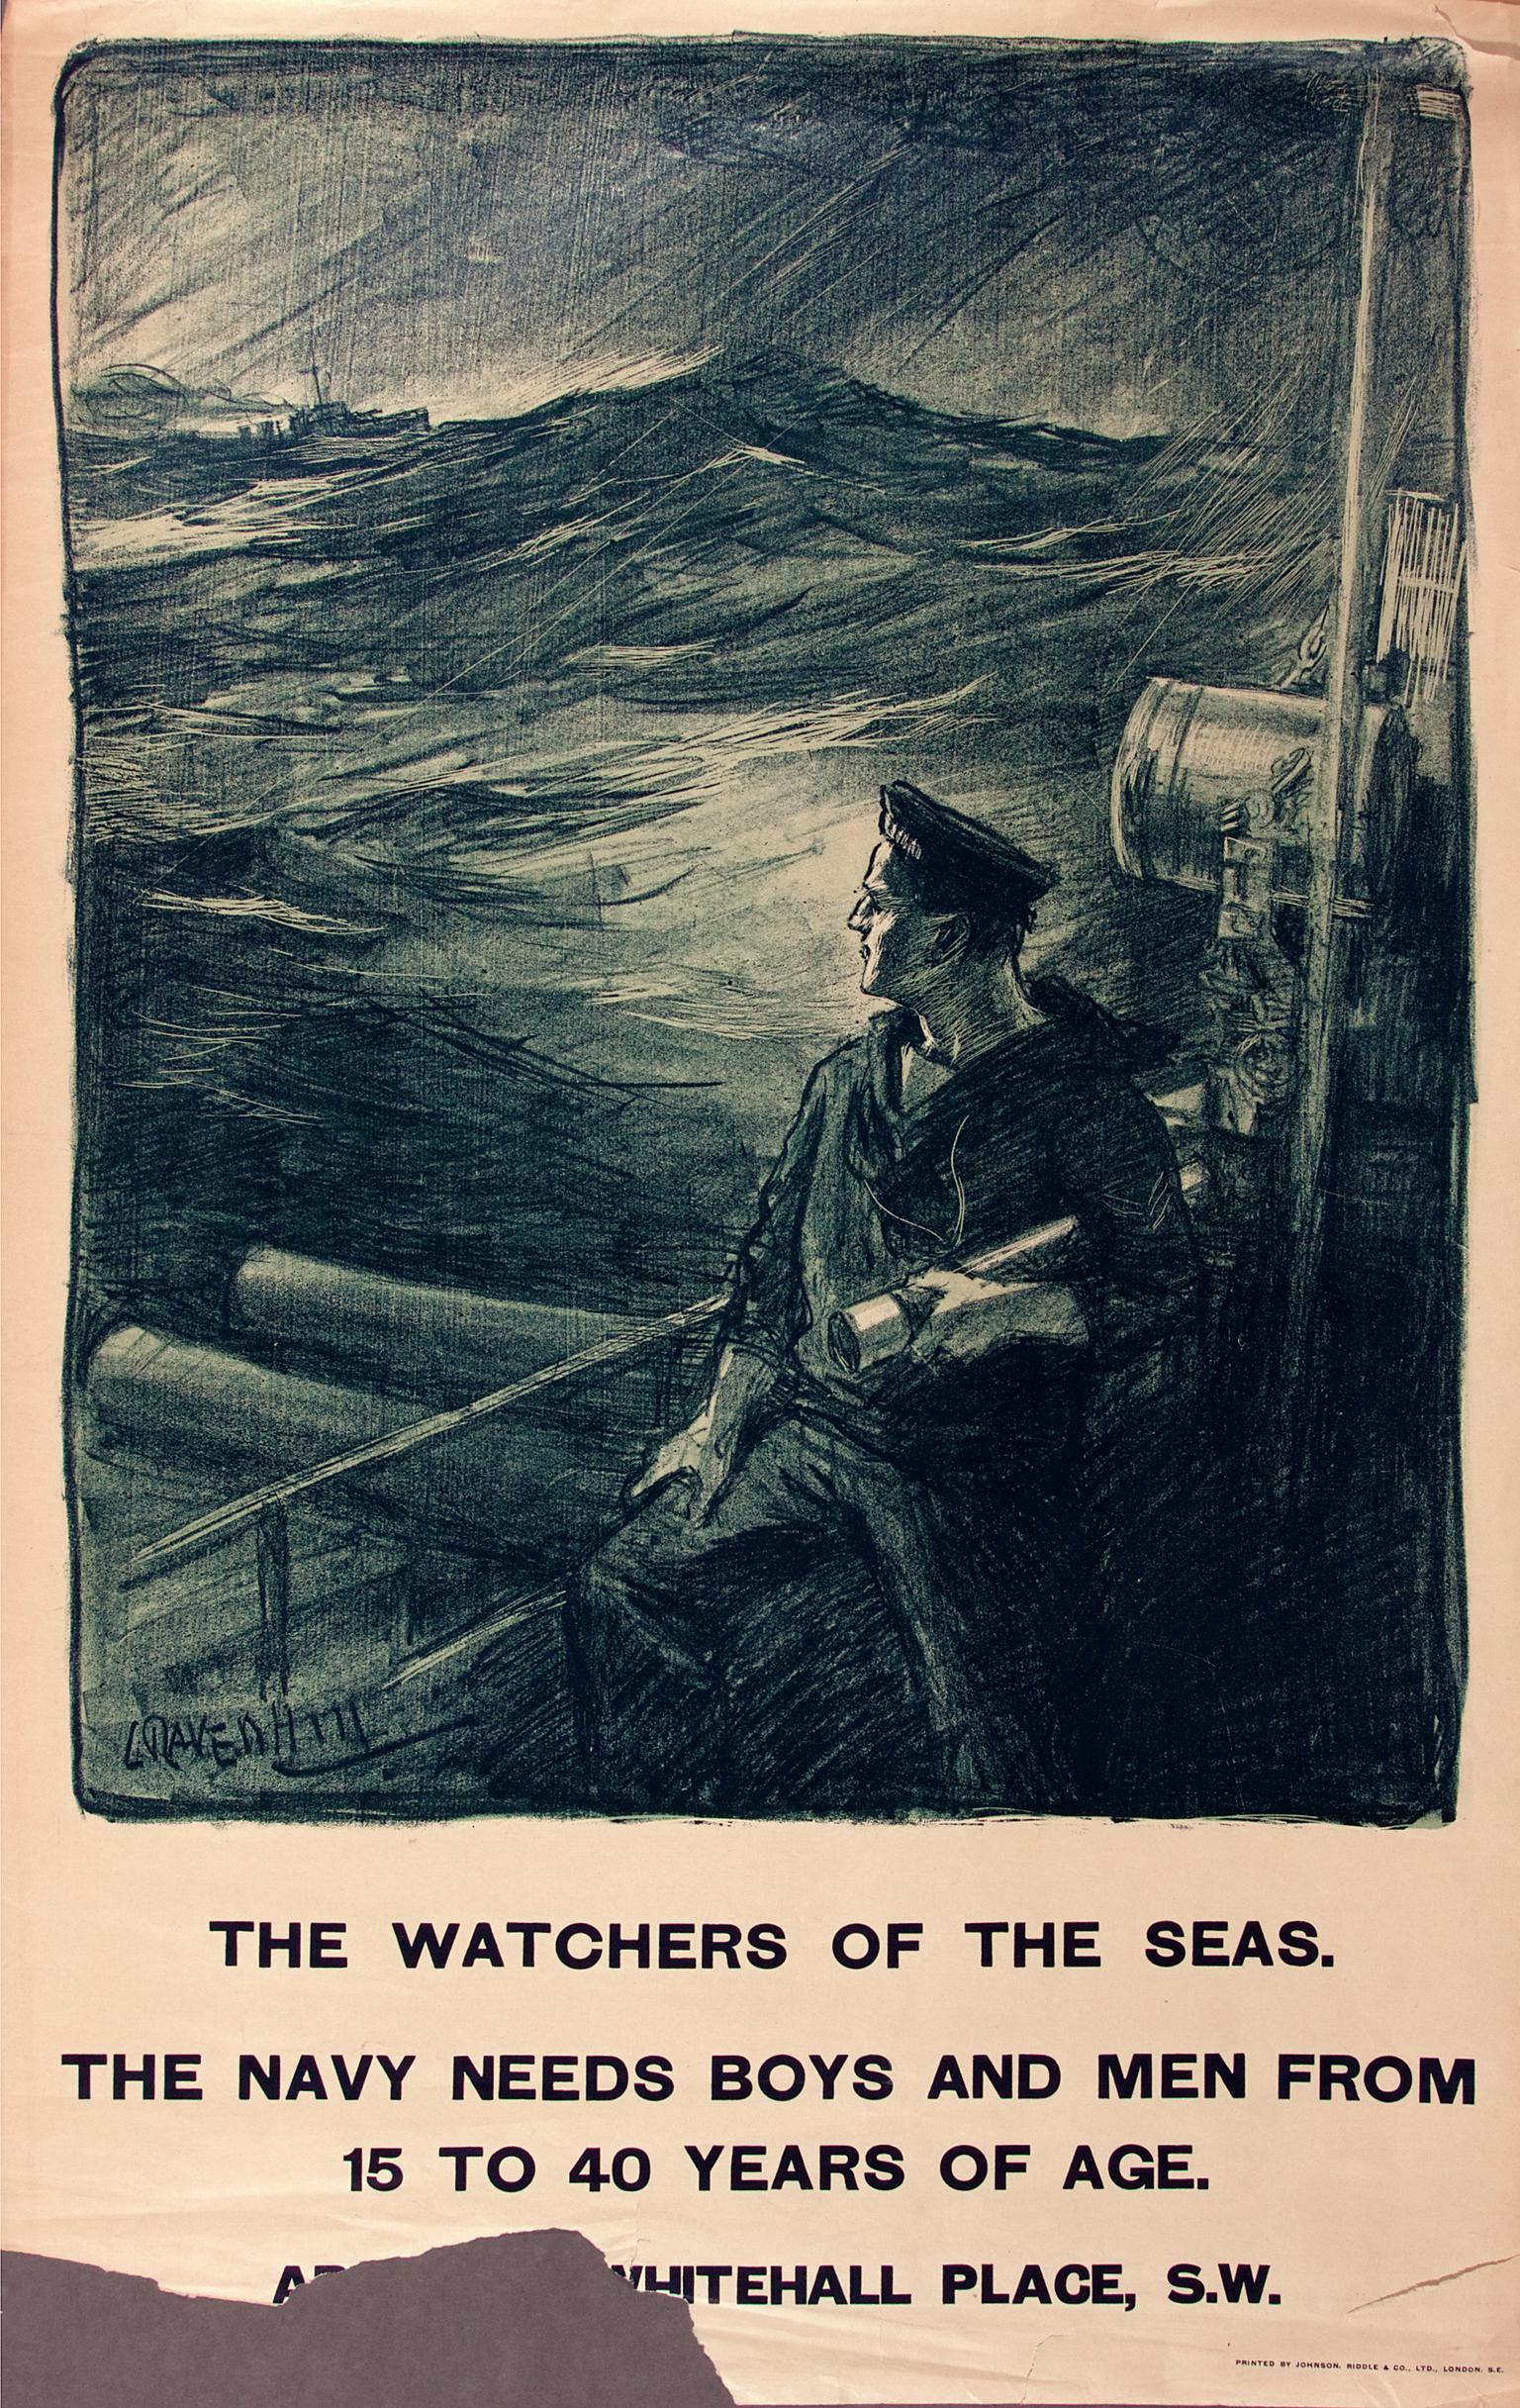 The Watchers of the Sea's